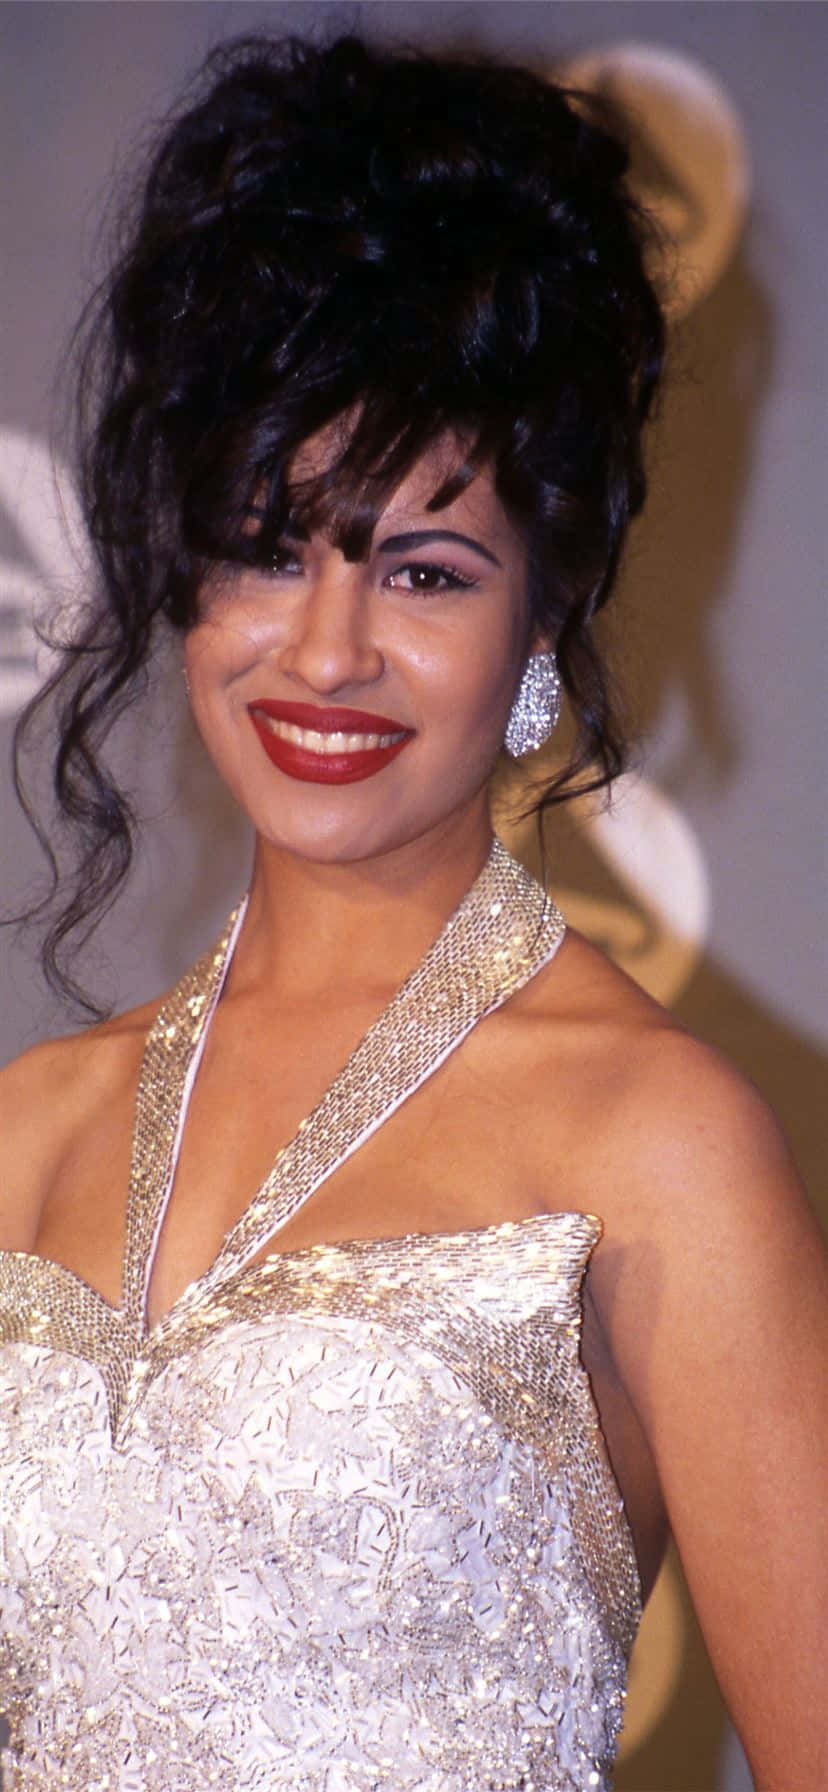 Make an iconic phone with this Selena Quintanilla iPhone wallpaper Wallpaper